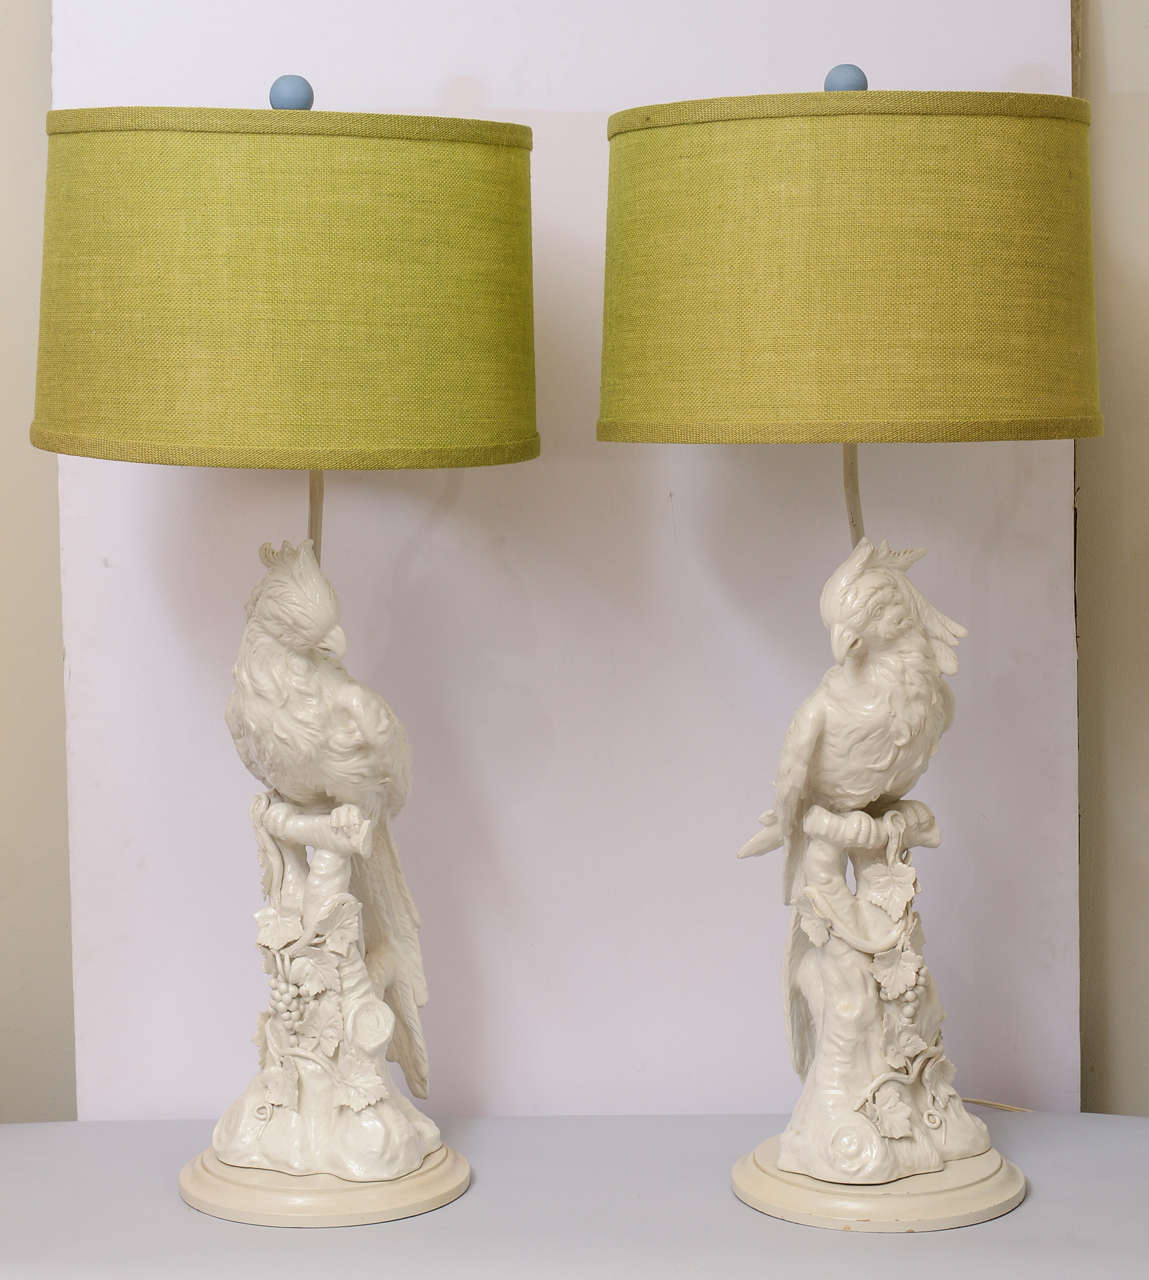 Pair of blanc de Chine lamps, each a beautifully detailed cockatiel resting on a branch with grape vines, on round base.  Shown with shades.